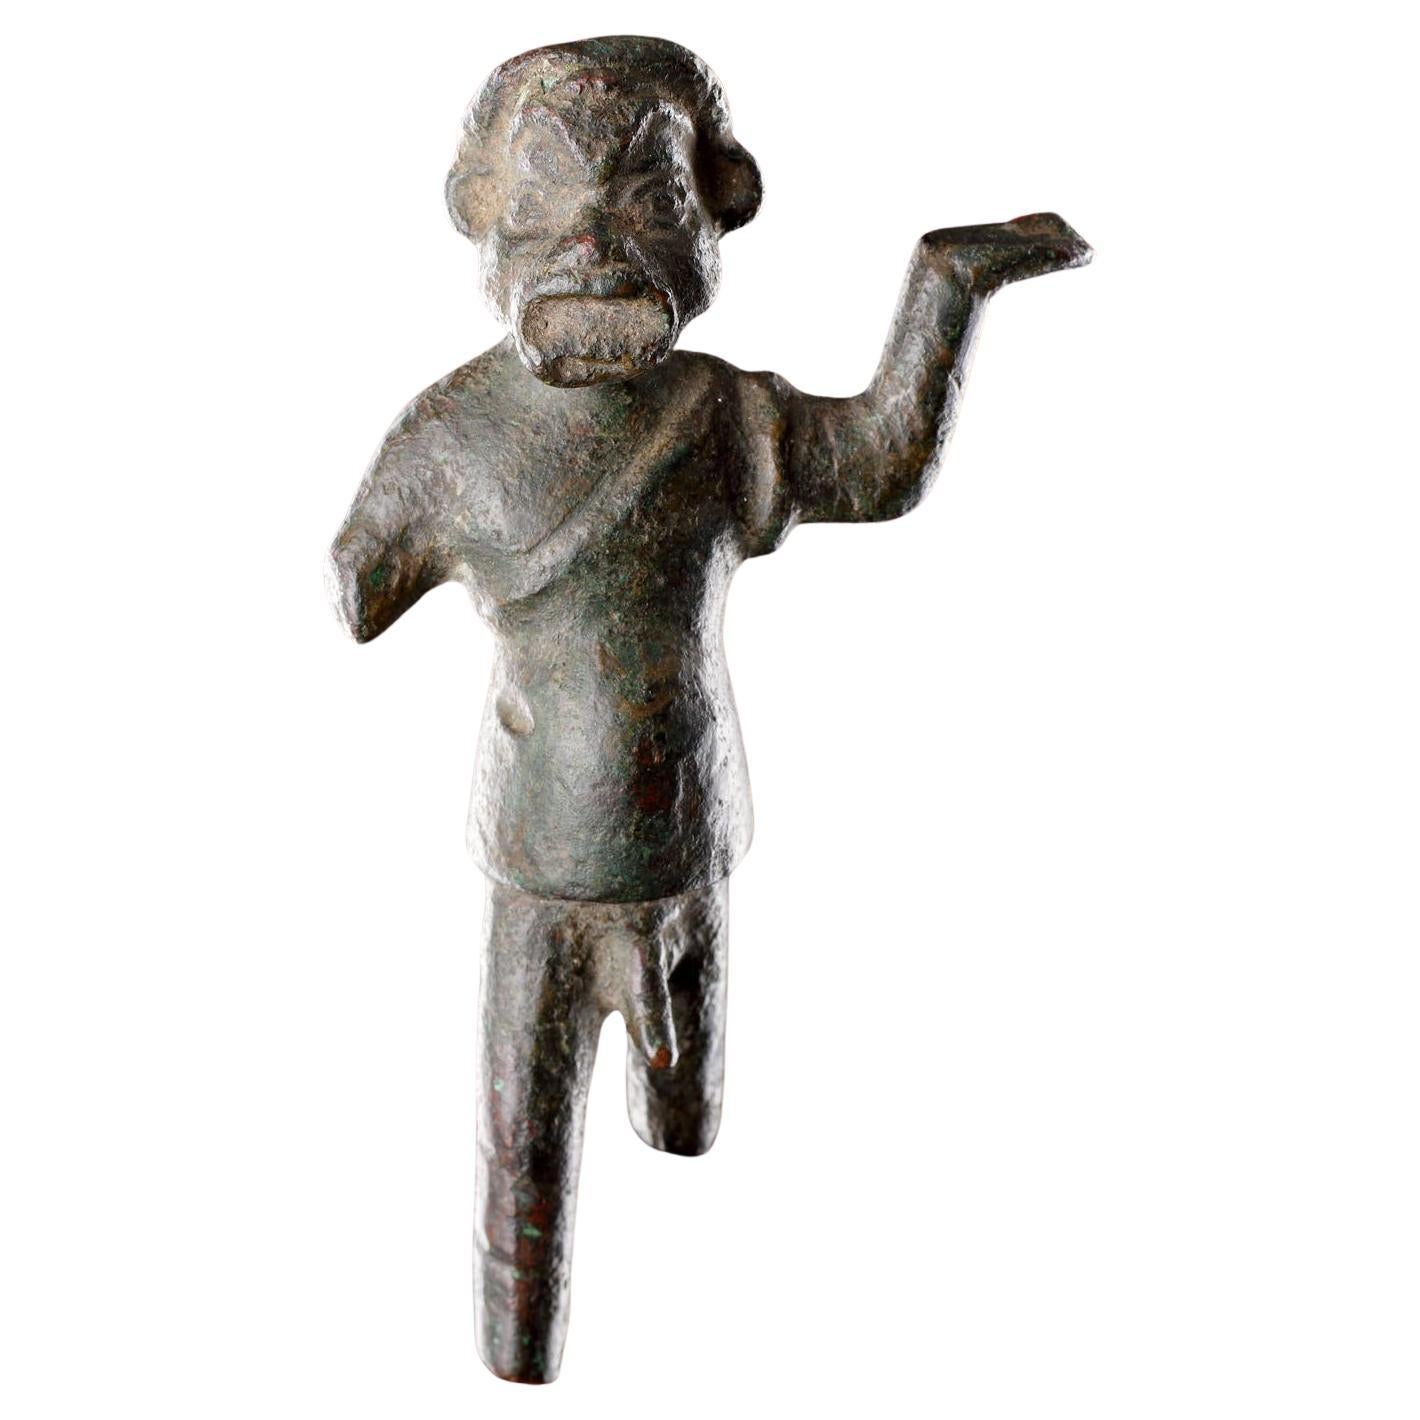 A Rare and Finely Detailed Greek Bronze Statuette of an Actor with Large Phallus